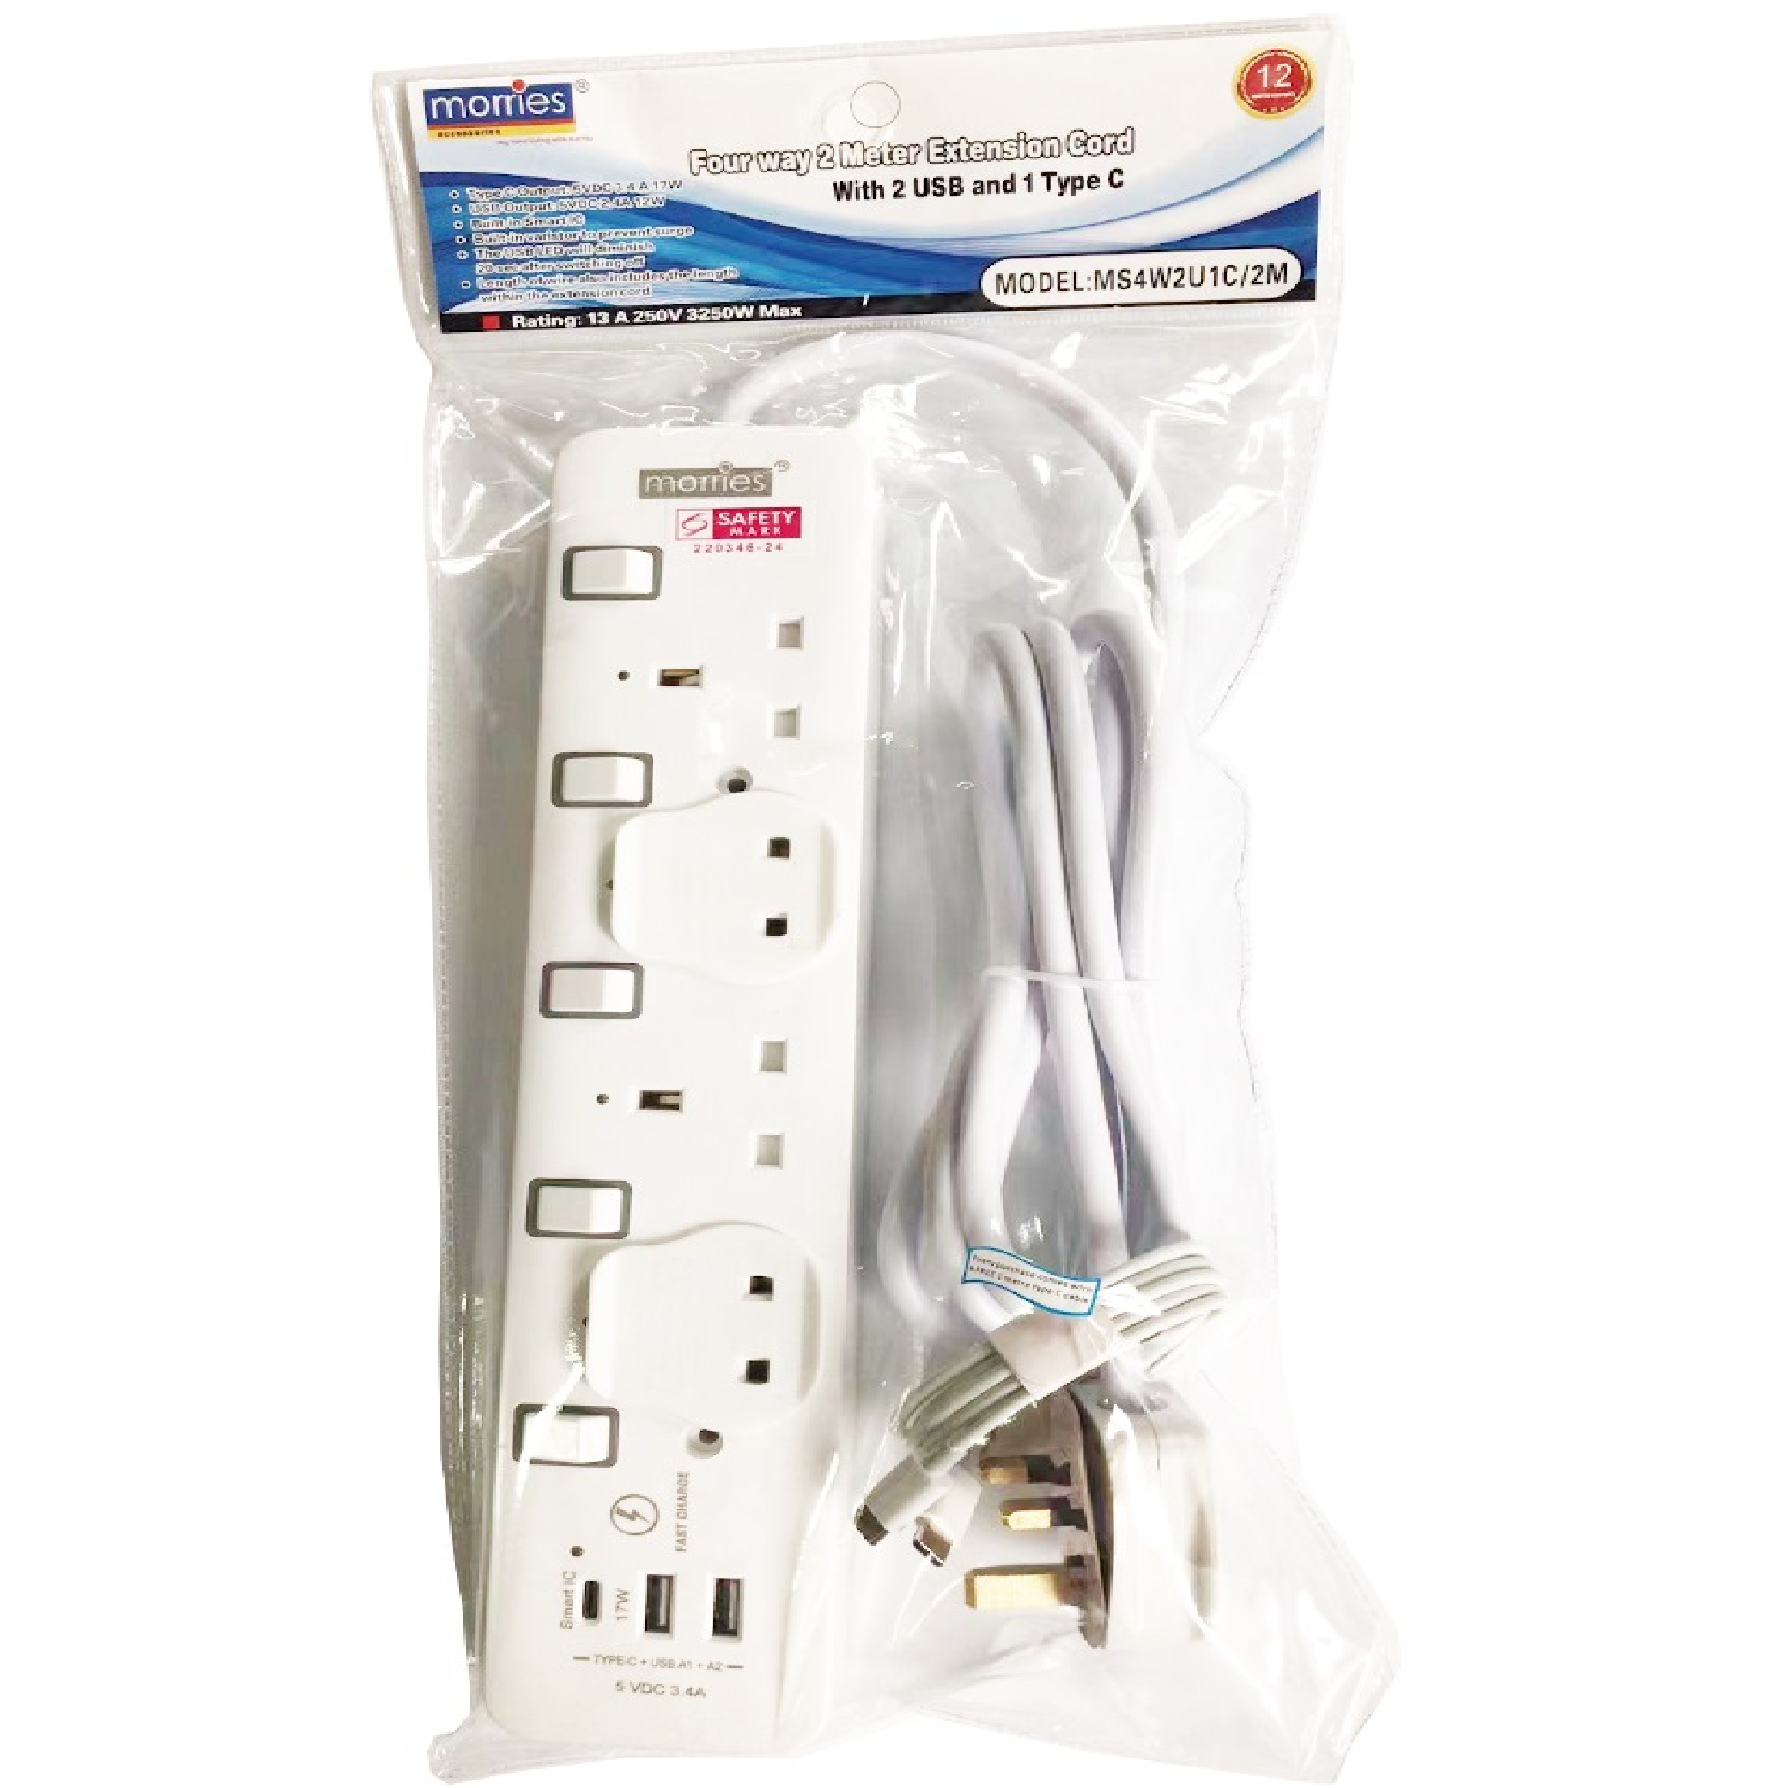 Morries 4 Way 2M Extension Cord With 2 USB & 1 TYPE C MS4W2U1C/2M